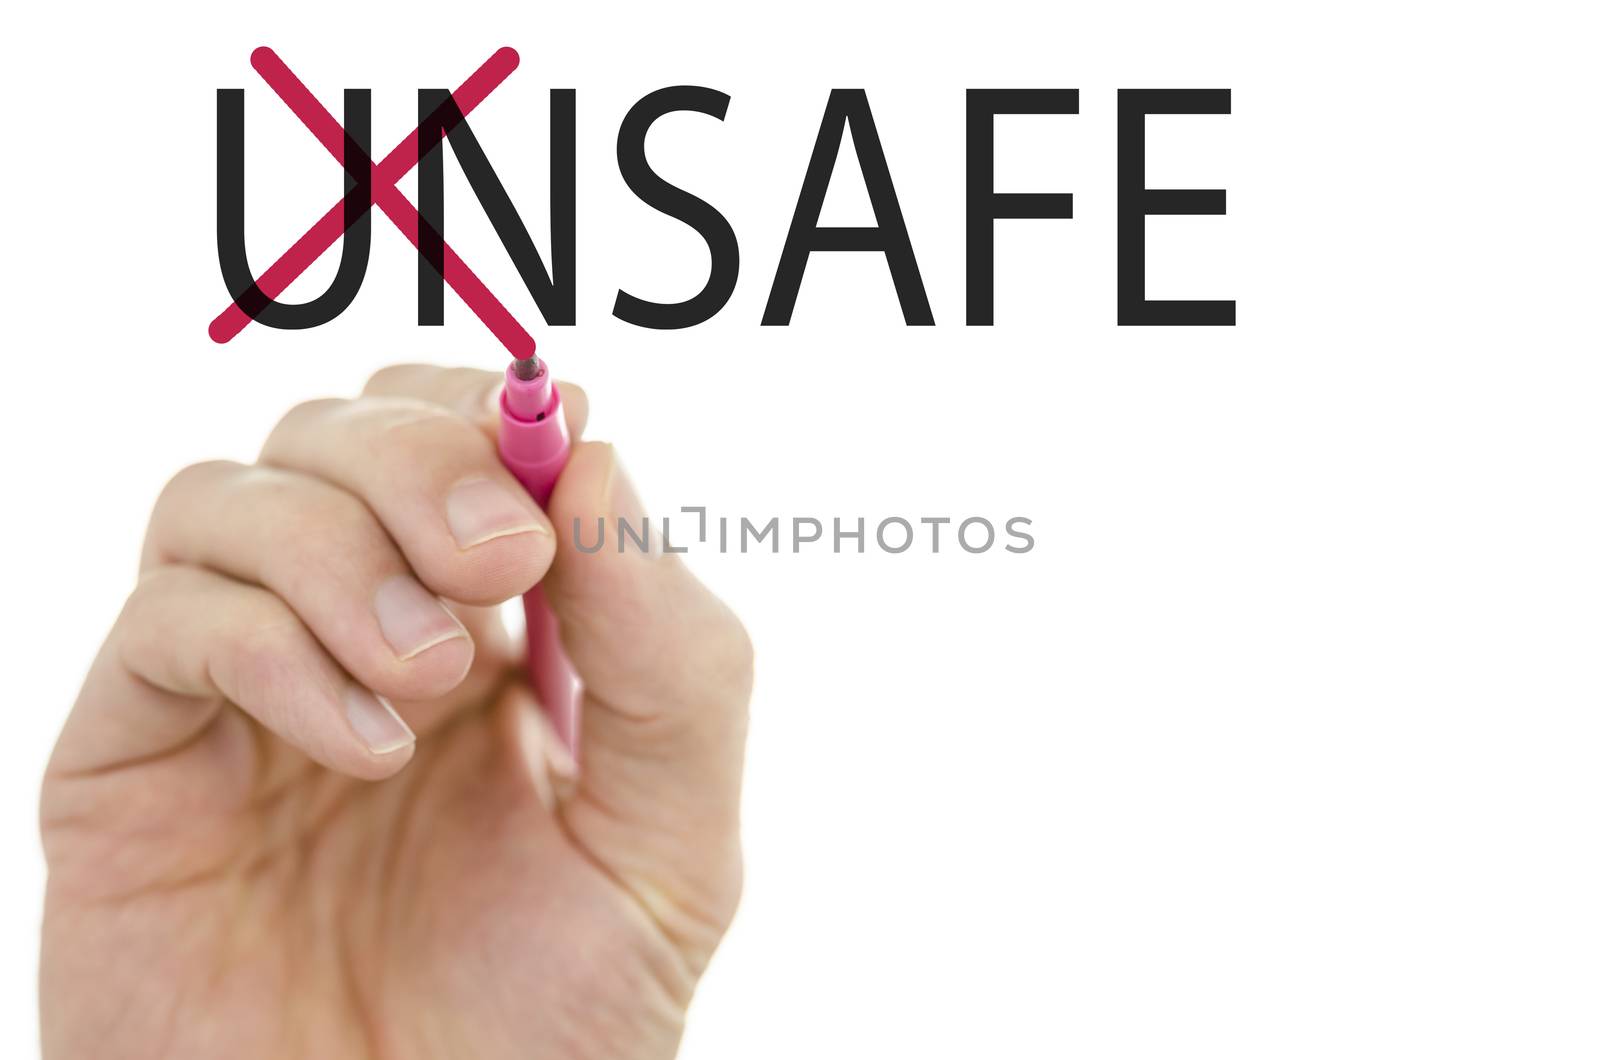 Changing word Unsafe into Safe by Gajus